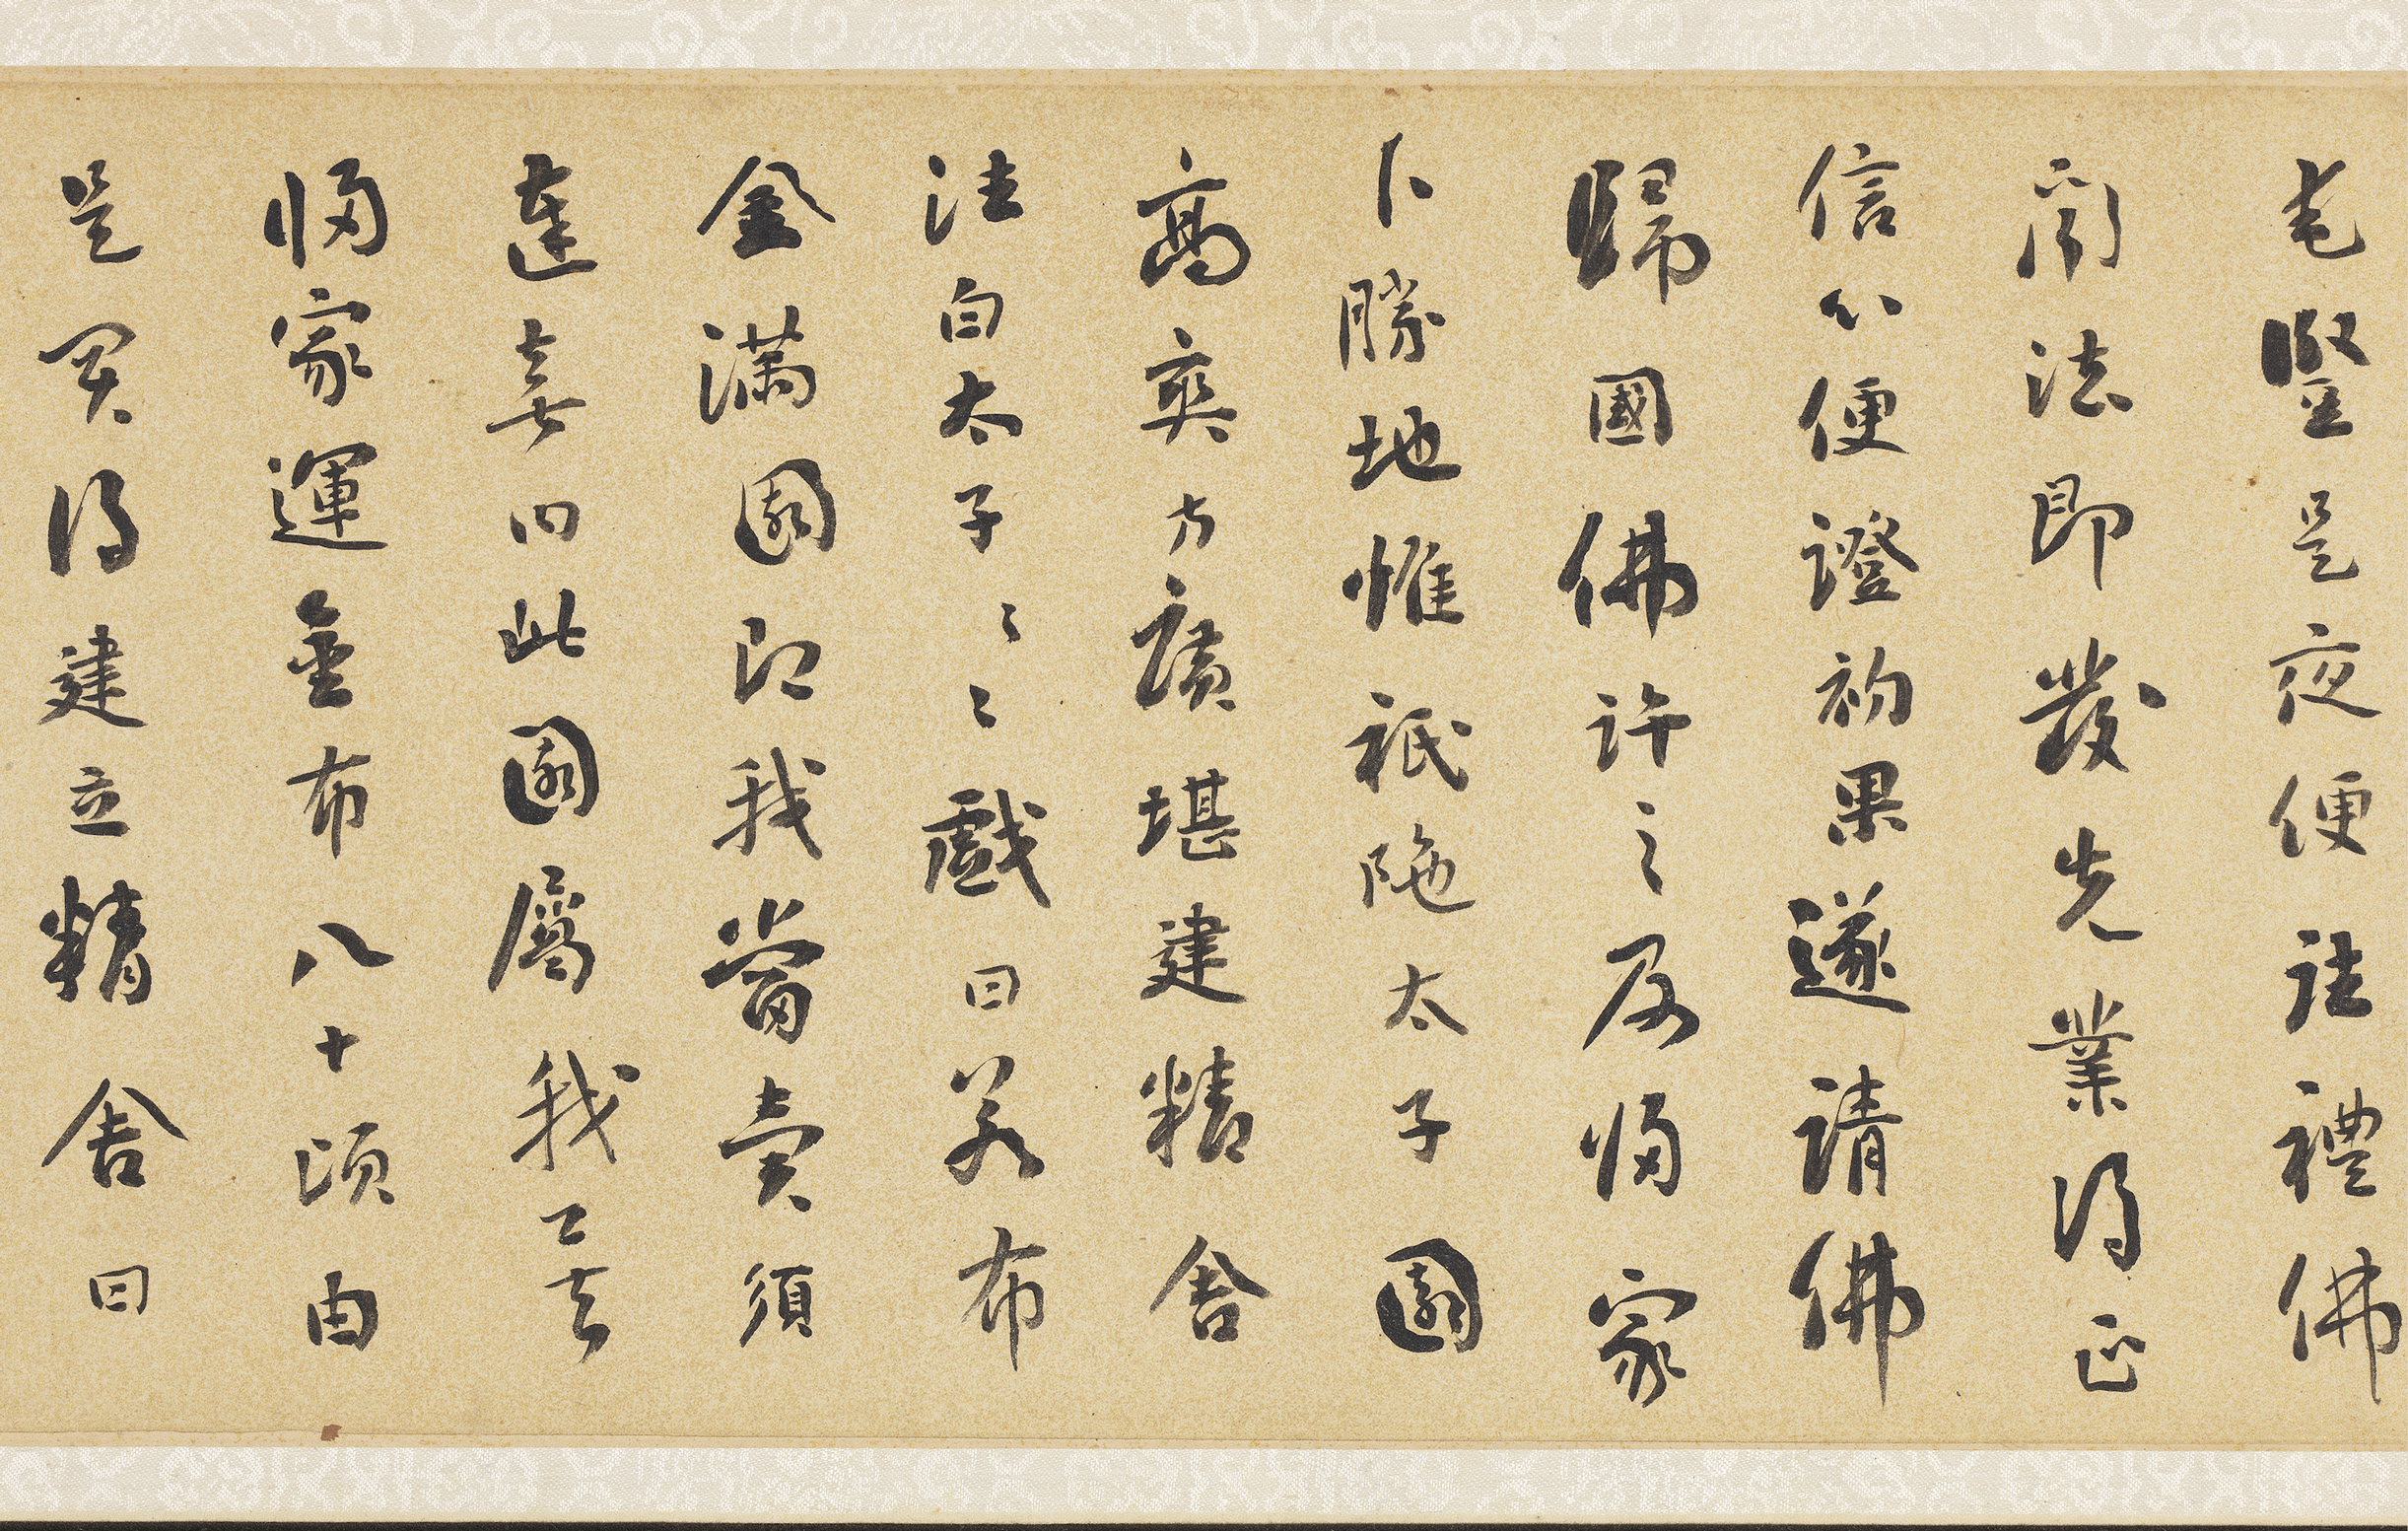 Exquisite Calligraphy from his Later Years